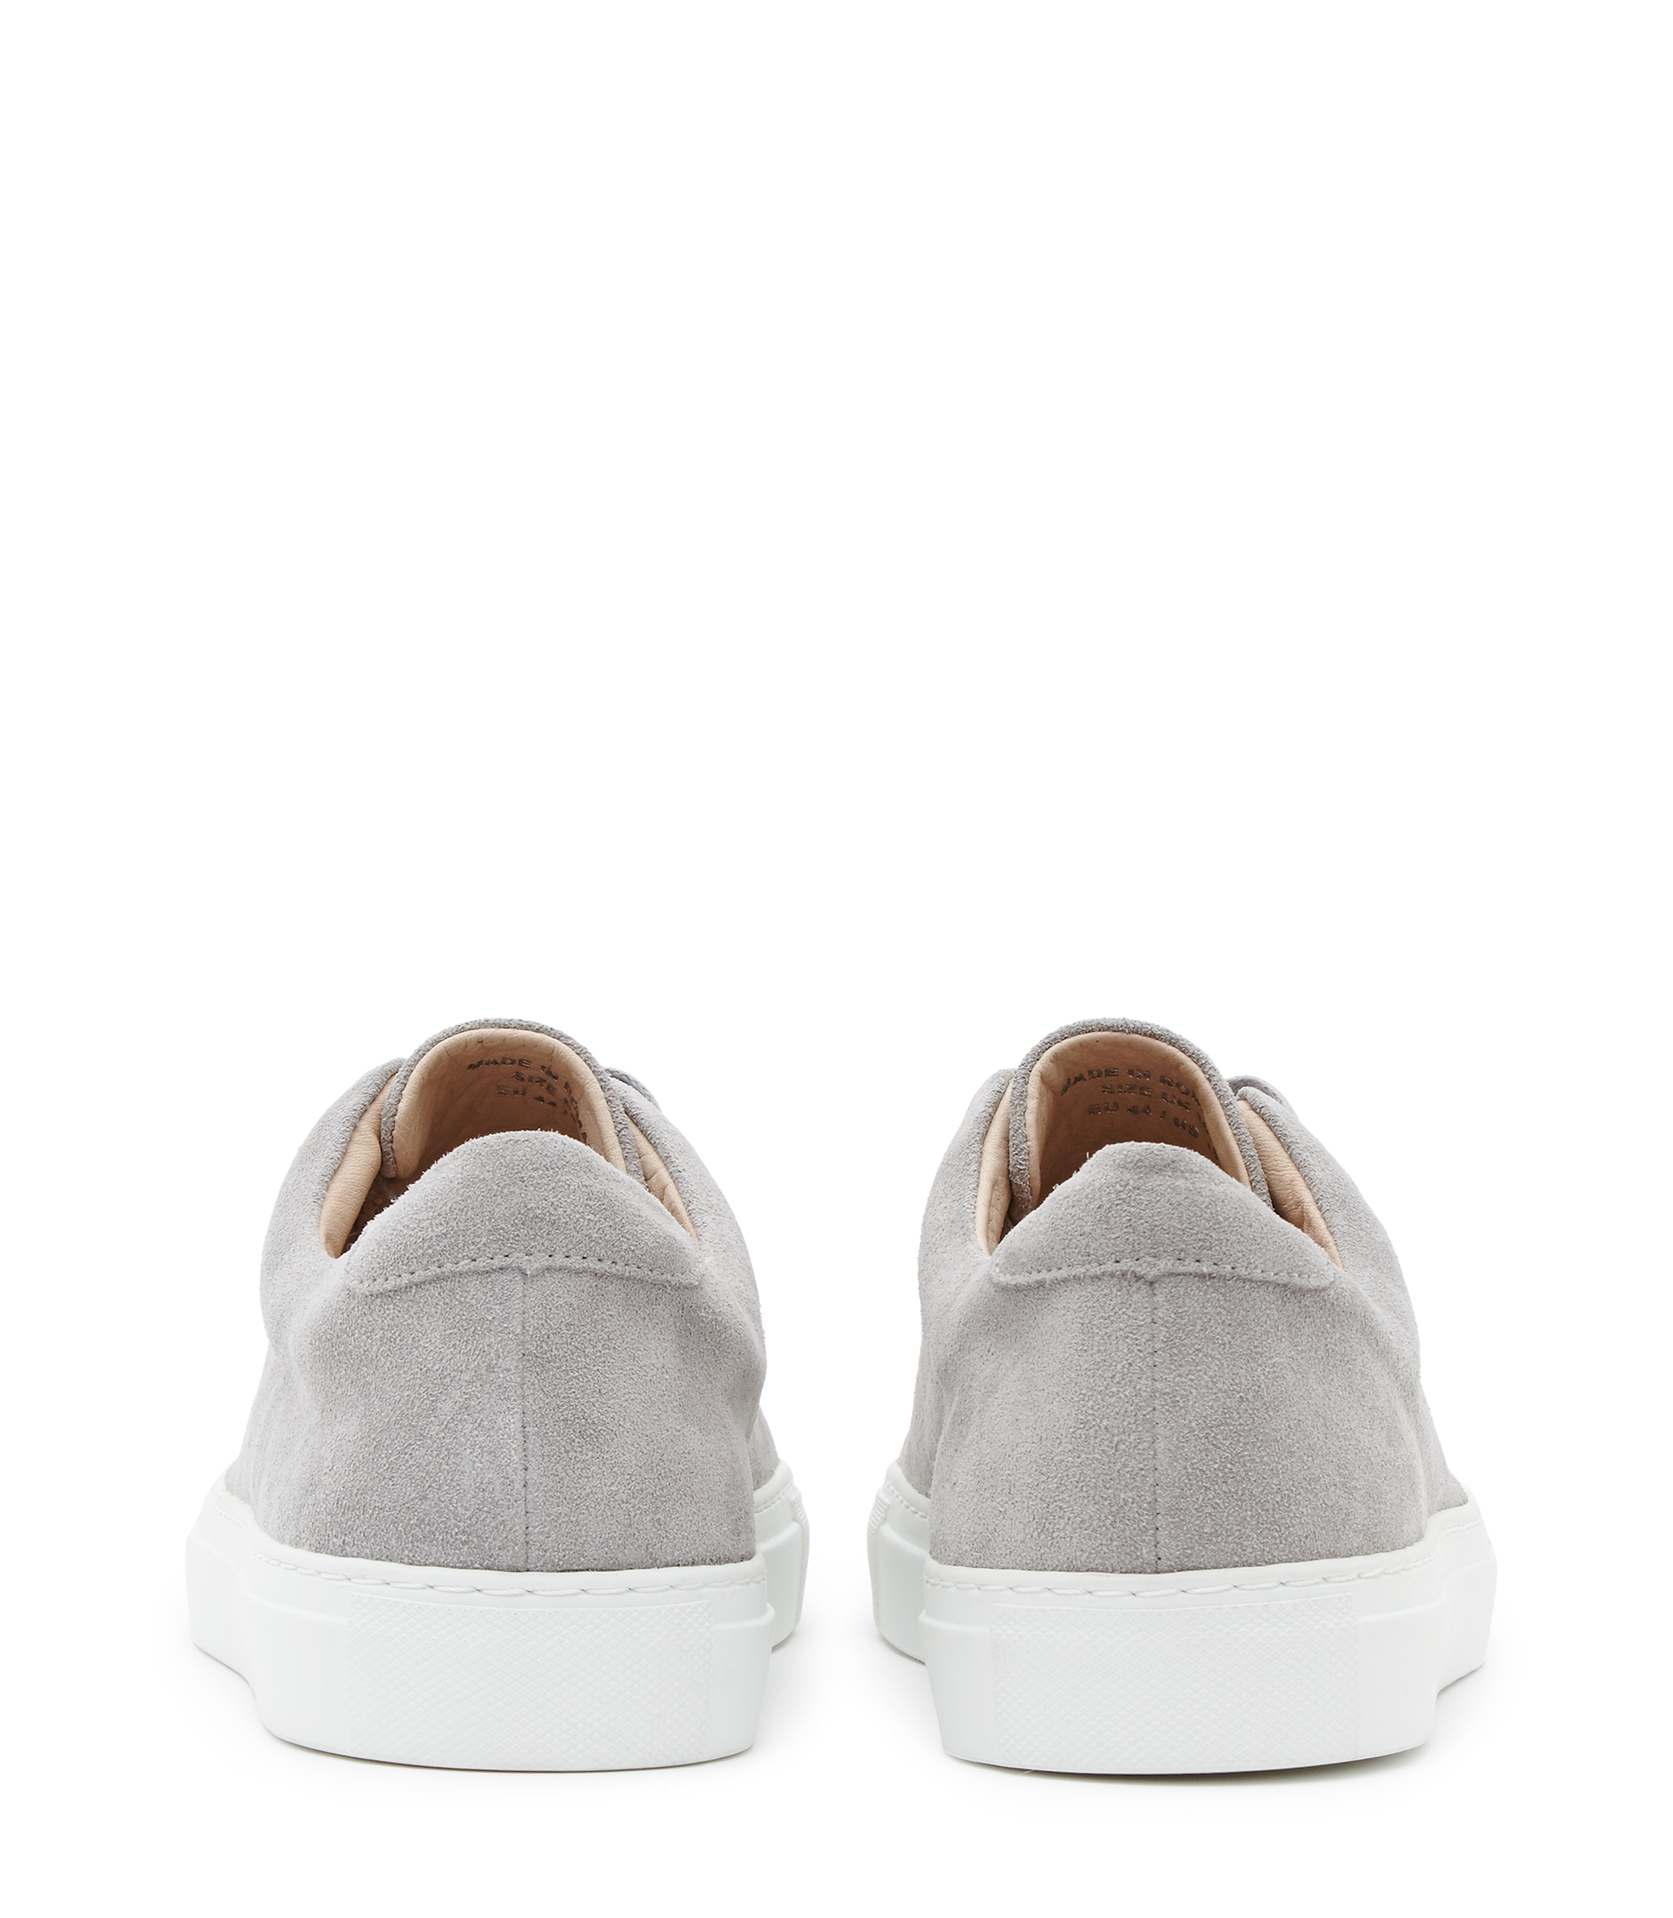 Lyst - Reiss Dan Suede Lace-up Sneakers in Gray for Men